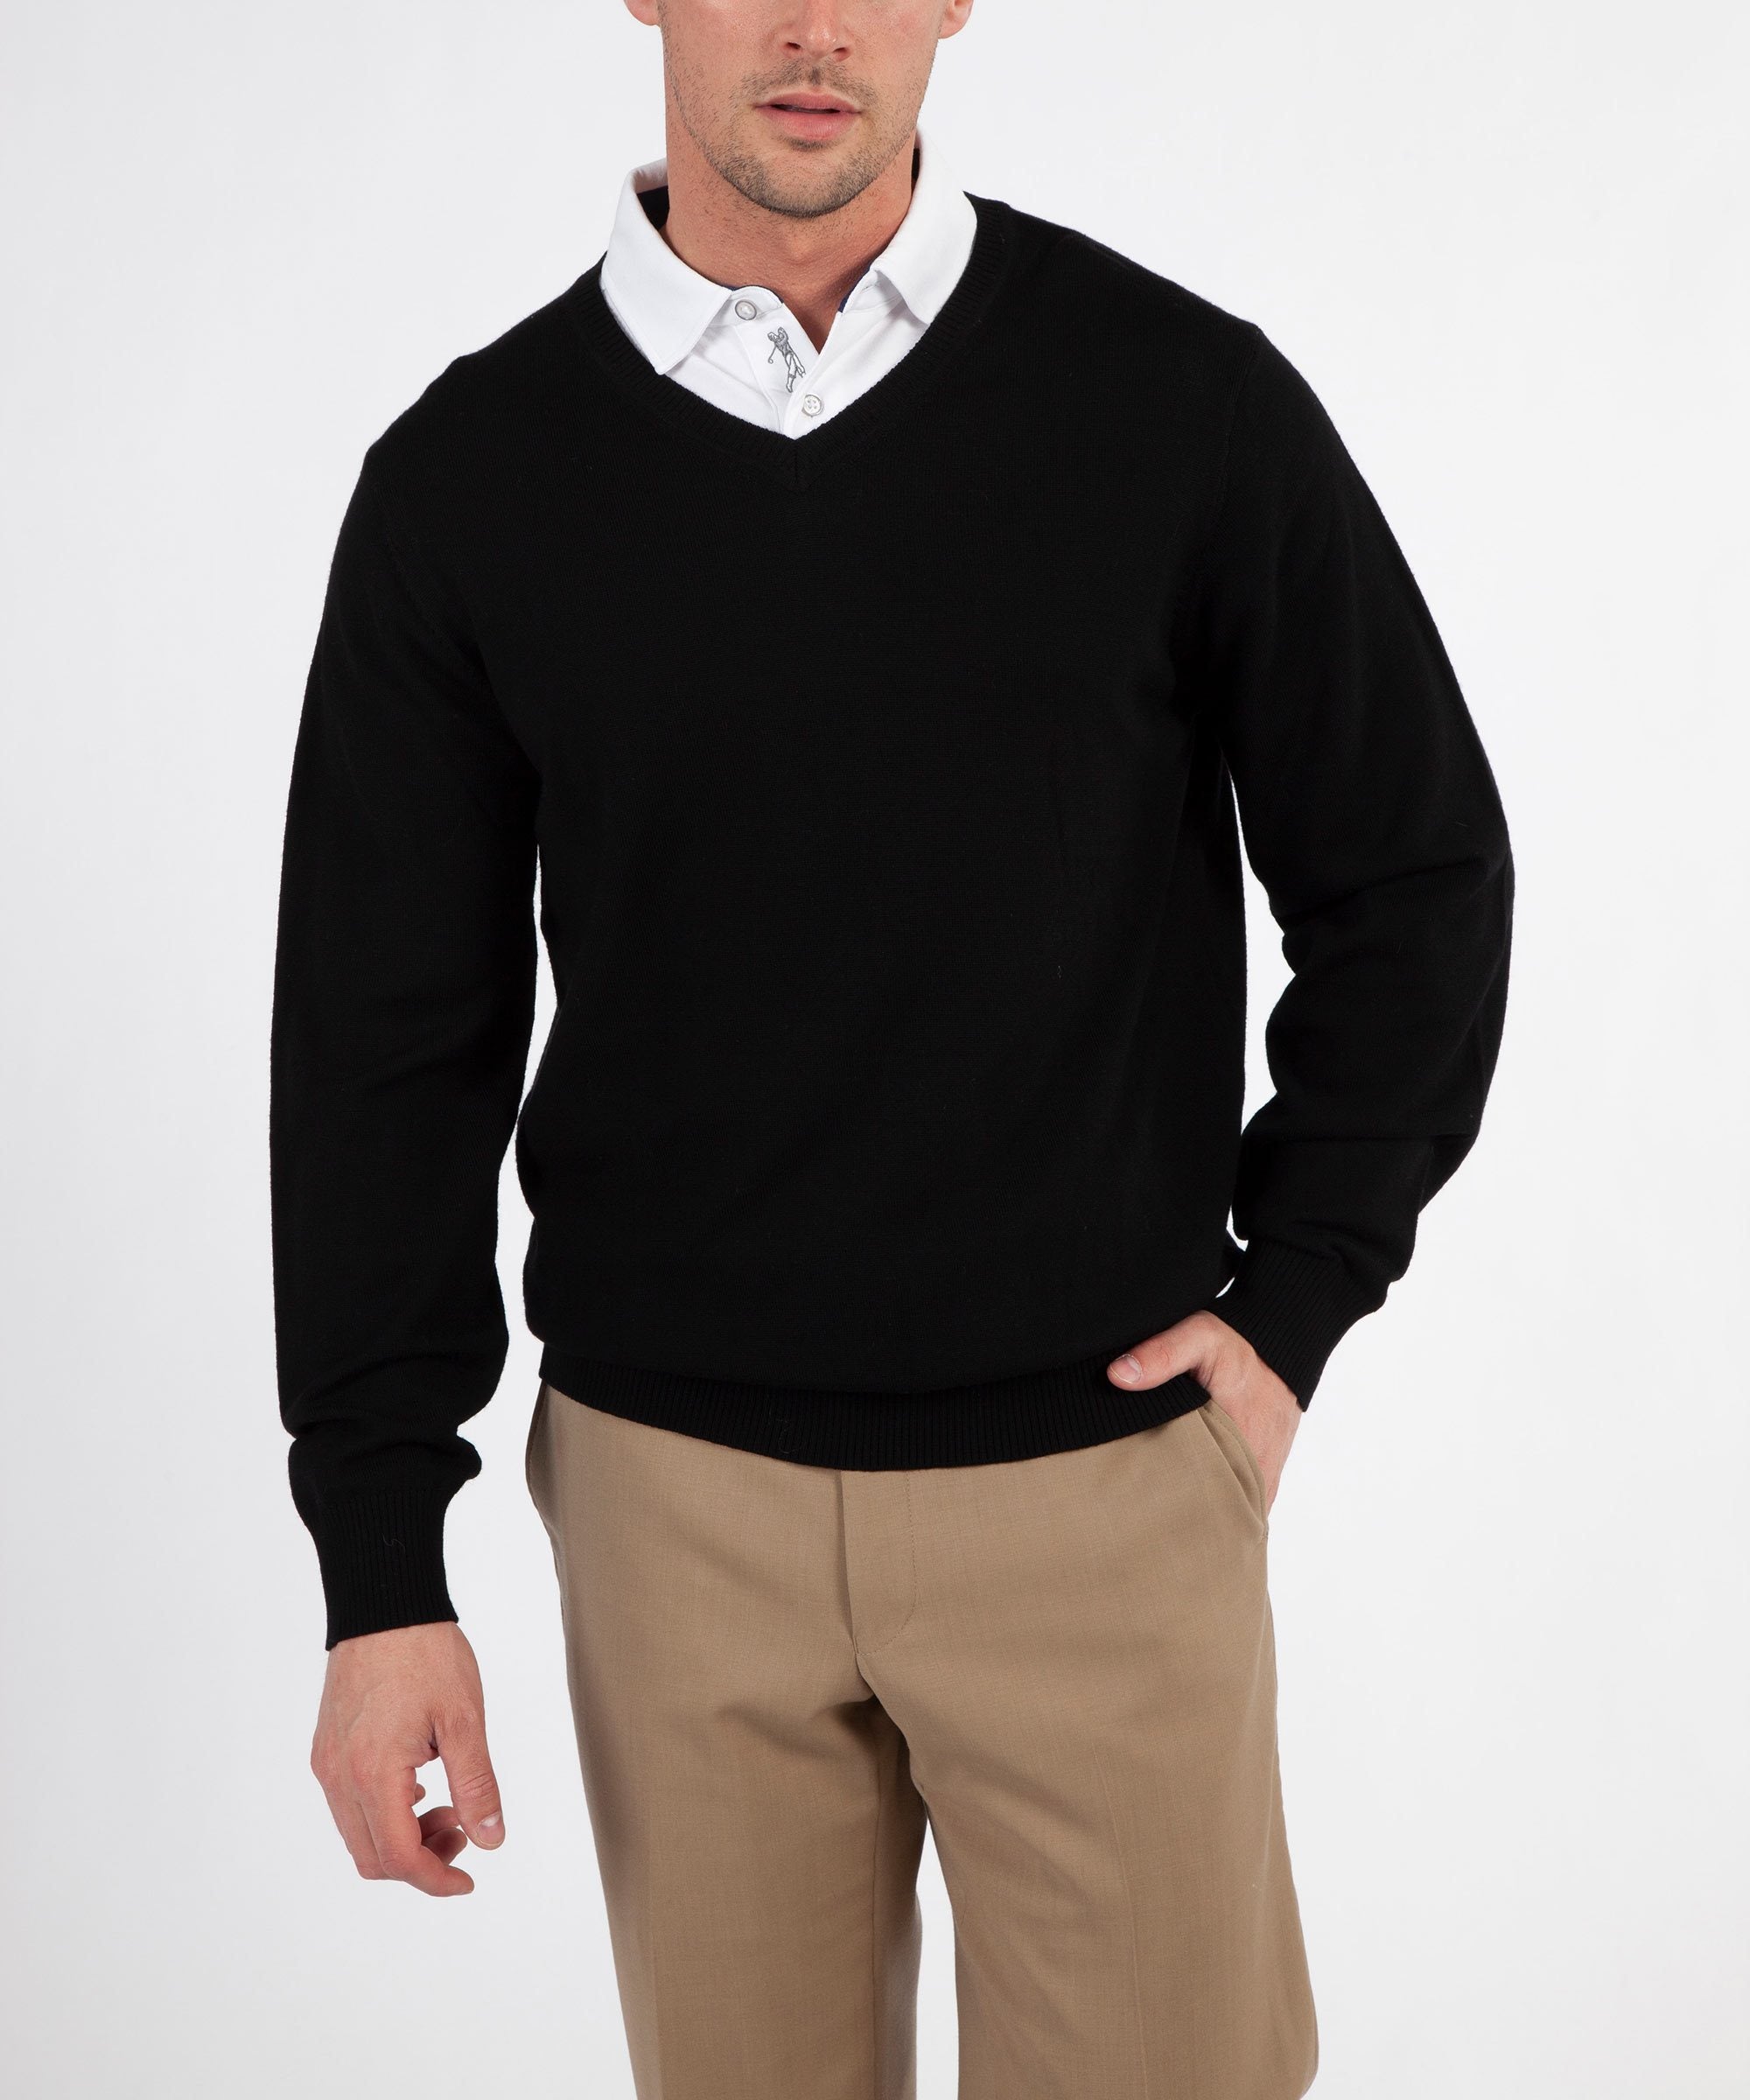 V Neck 100% Woolen Black And White Color Sweater With Full Sleeves